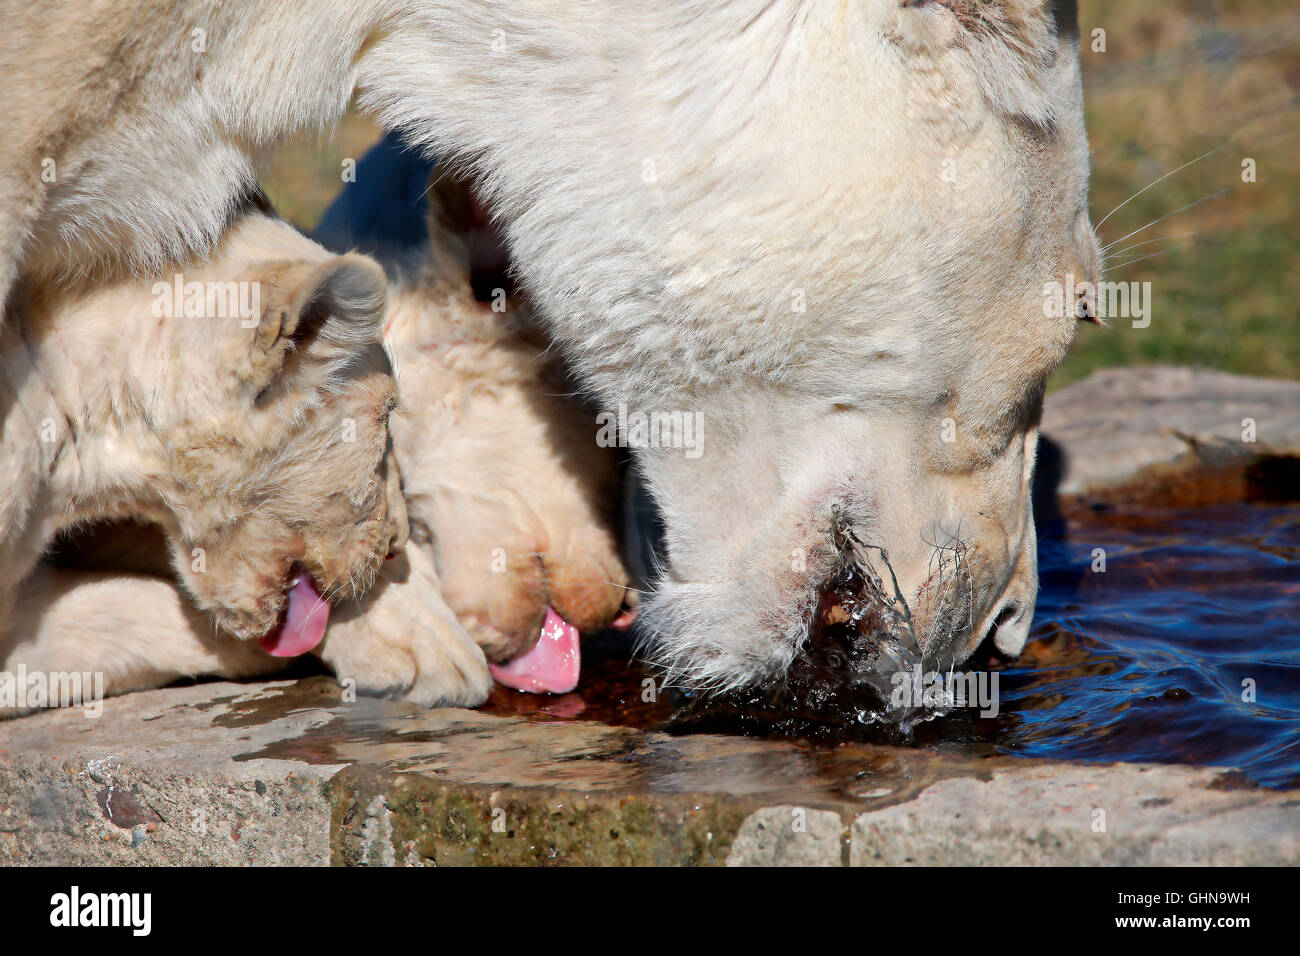 White lioness (Panthera leo) drinking water with cubs at Drakenstein Lion Park, Paarl, Western Cape, South Africa Stock Photo